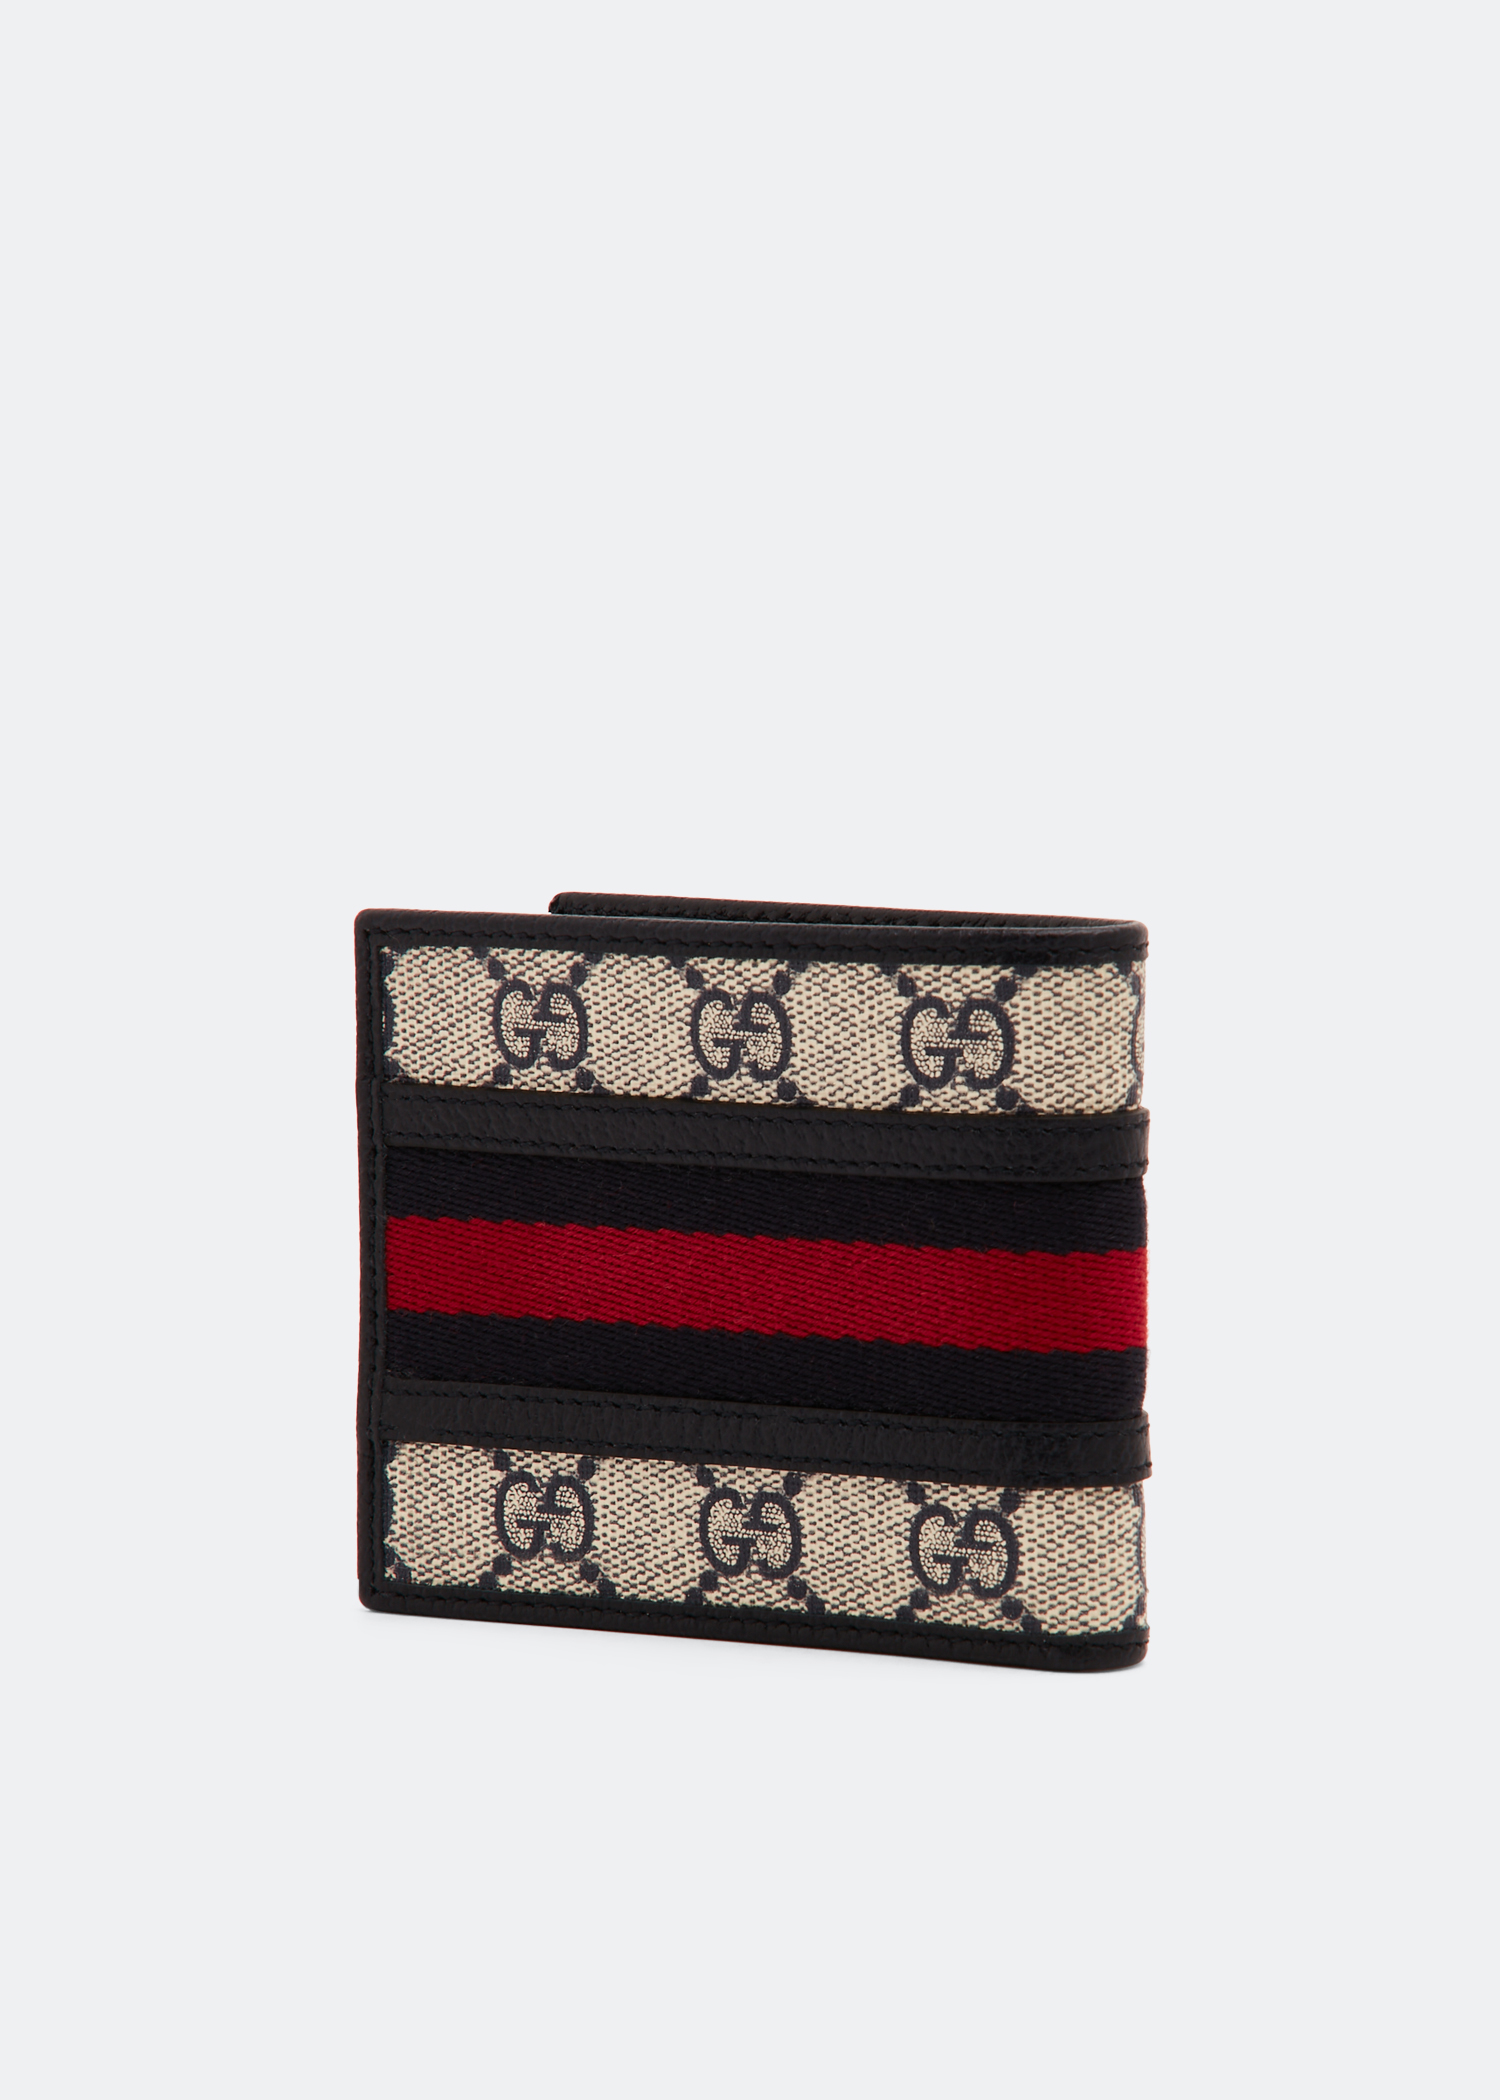 Red Gucci Wallet - 43 For Sale on 1stDibs | gucci red wallet, gucci wallet  red, gucci red wallet on chain